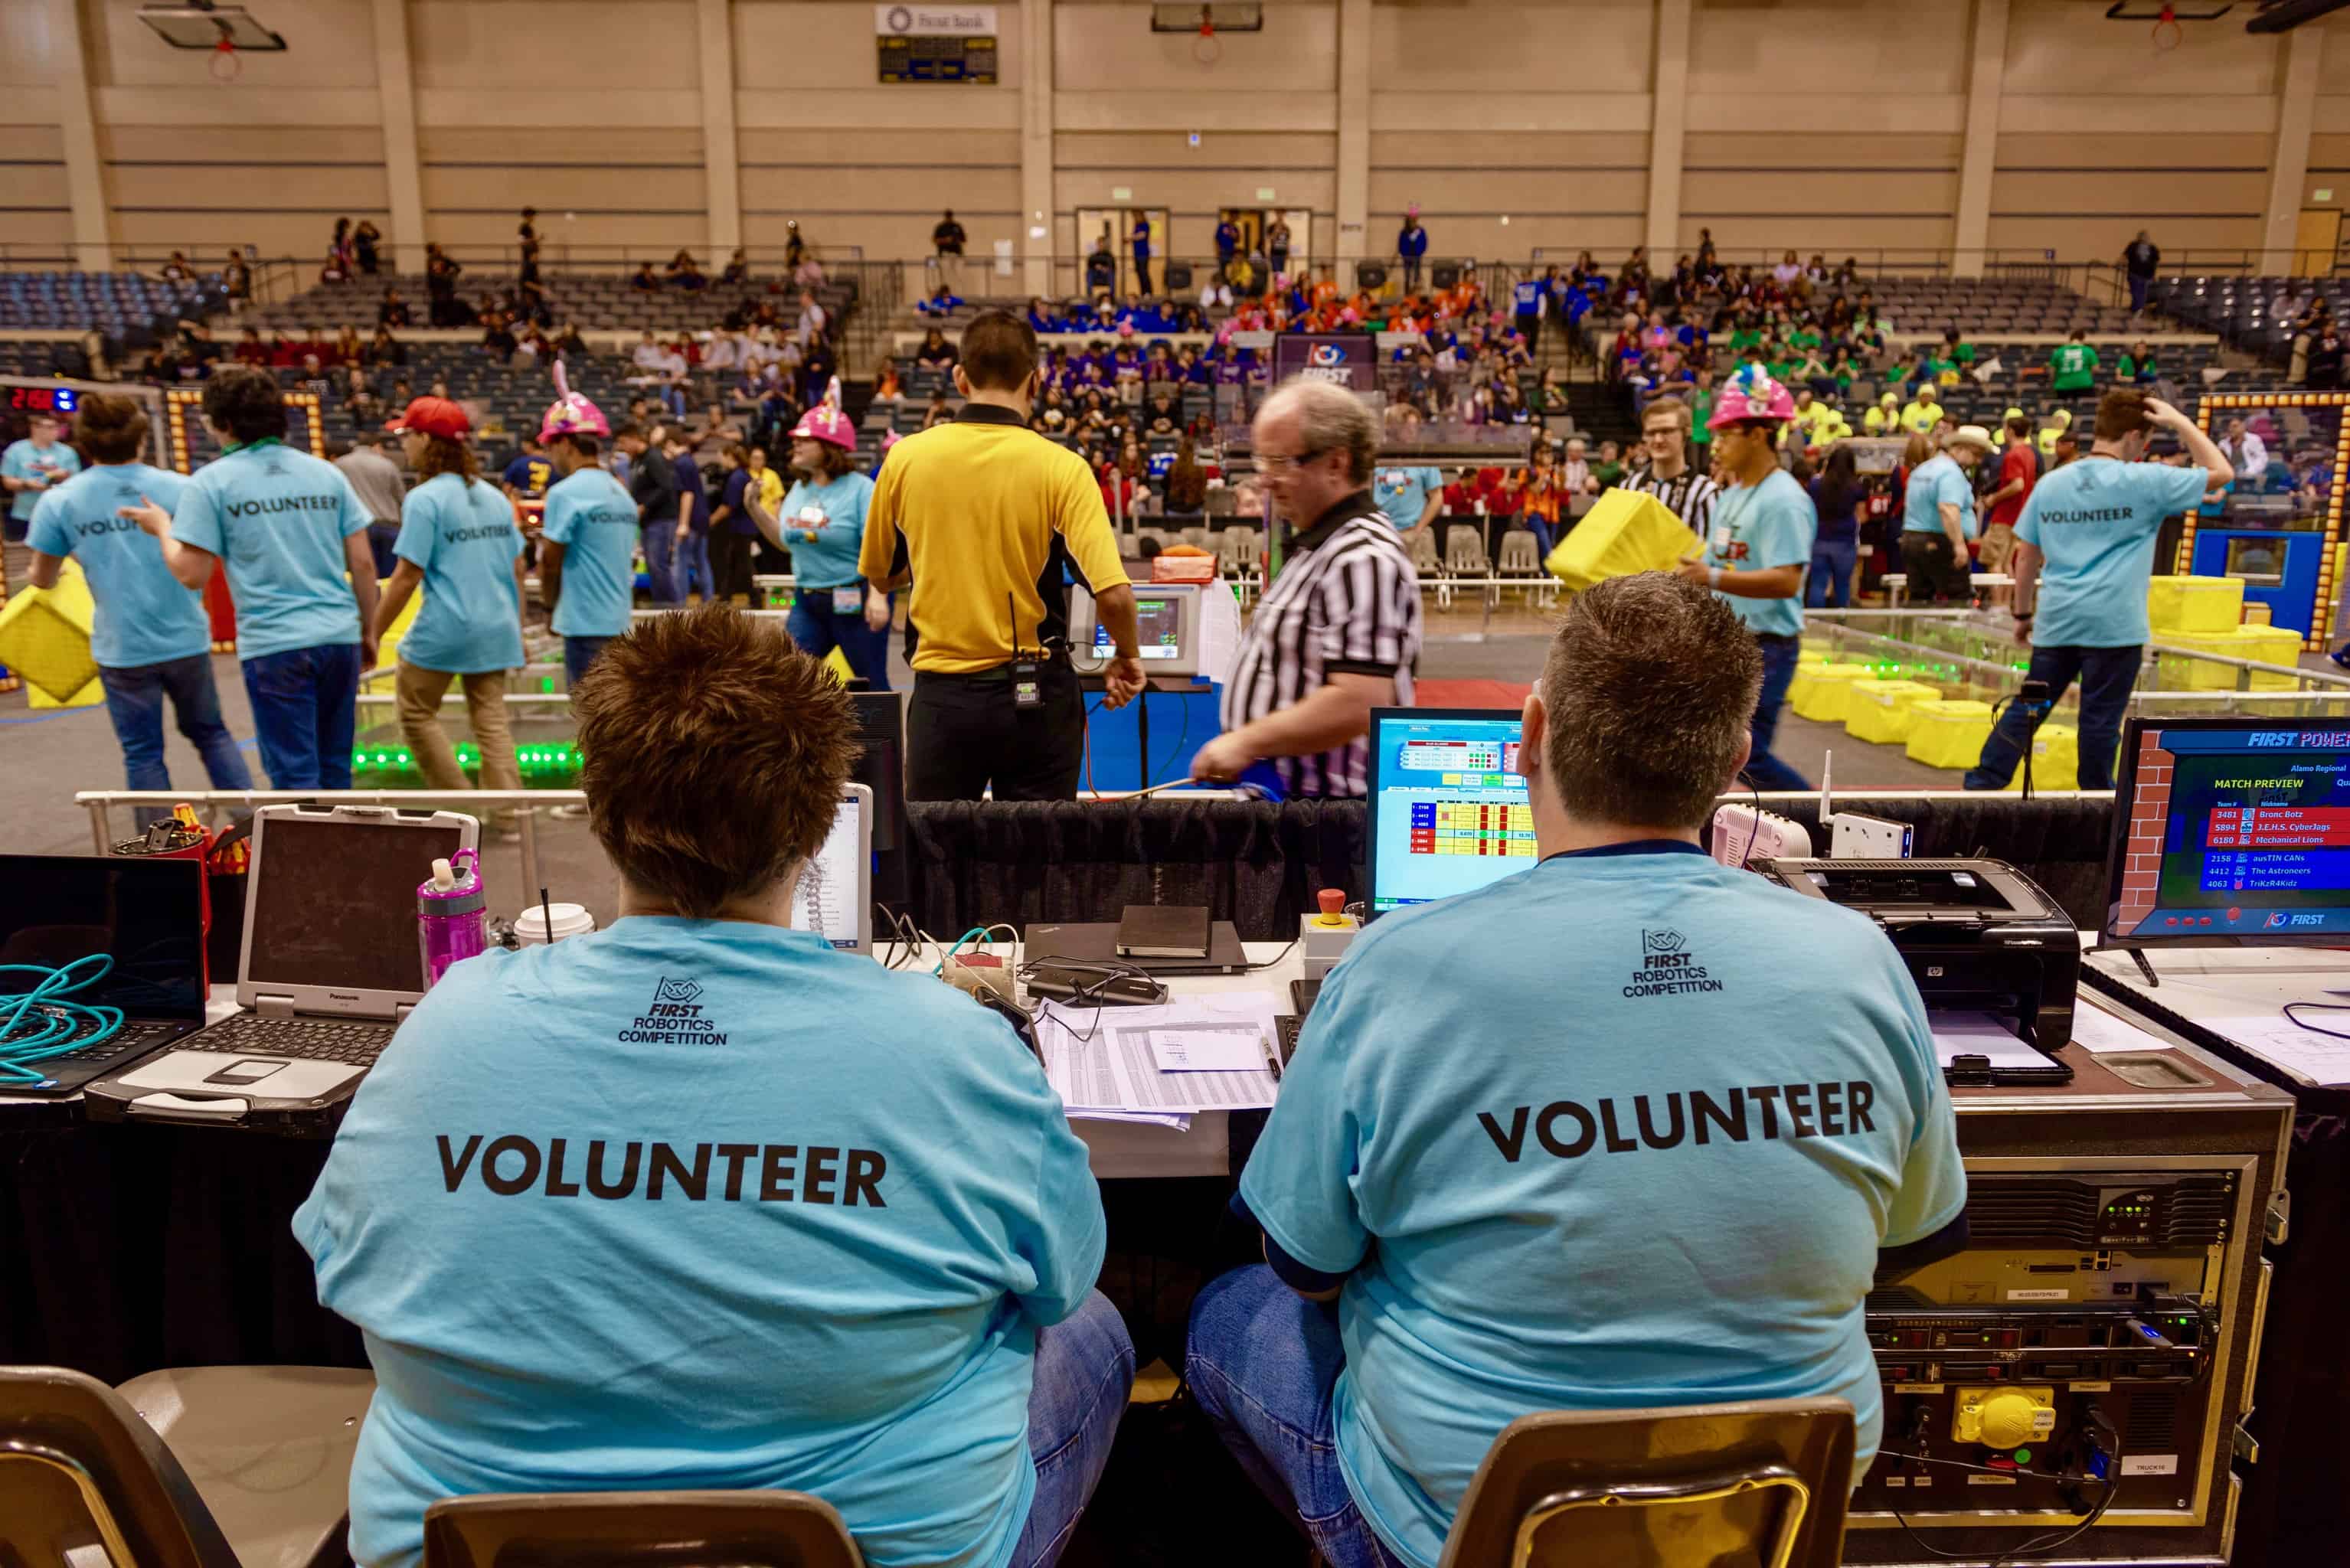 Volunteers resetting the FRC Field at a robotics event